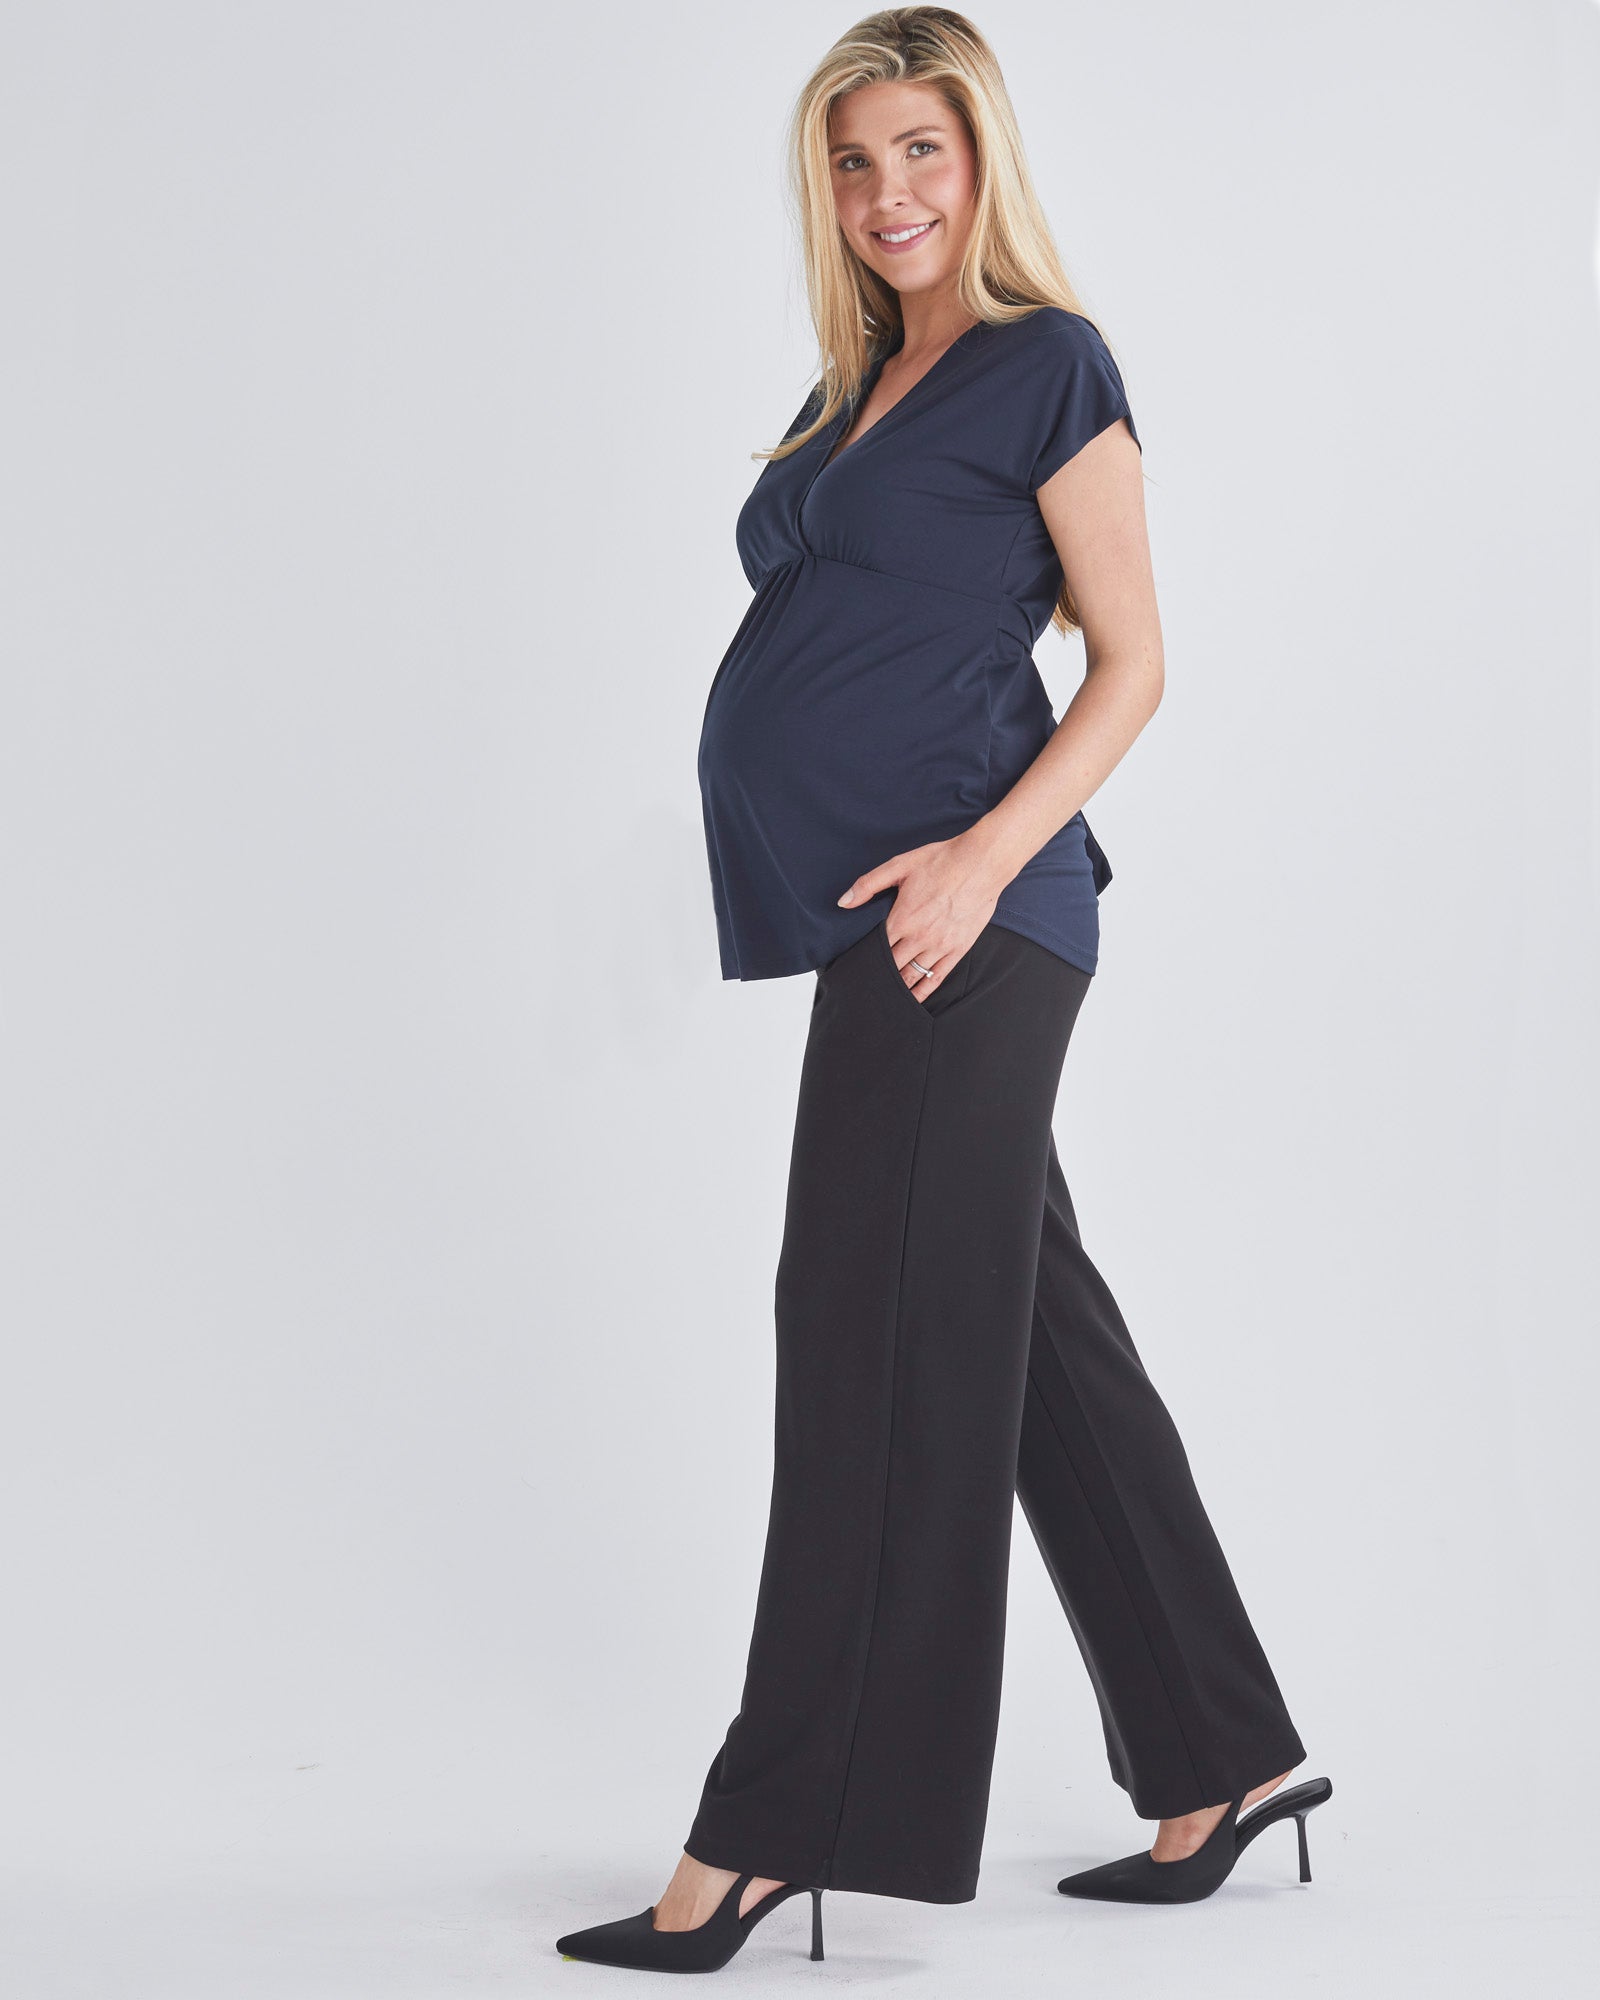 Side View - A Pregnant Woman Wearing Short Sleeve Nursing Friendly Maternity Crossover Navy Work Top  from Angel Maternity